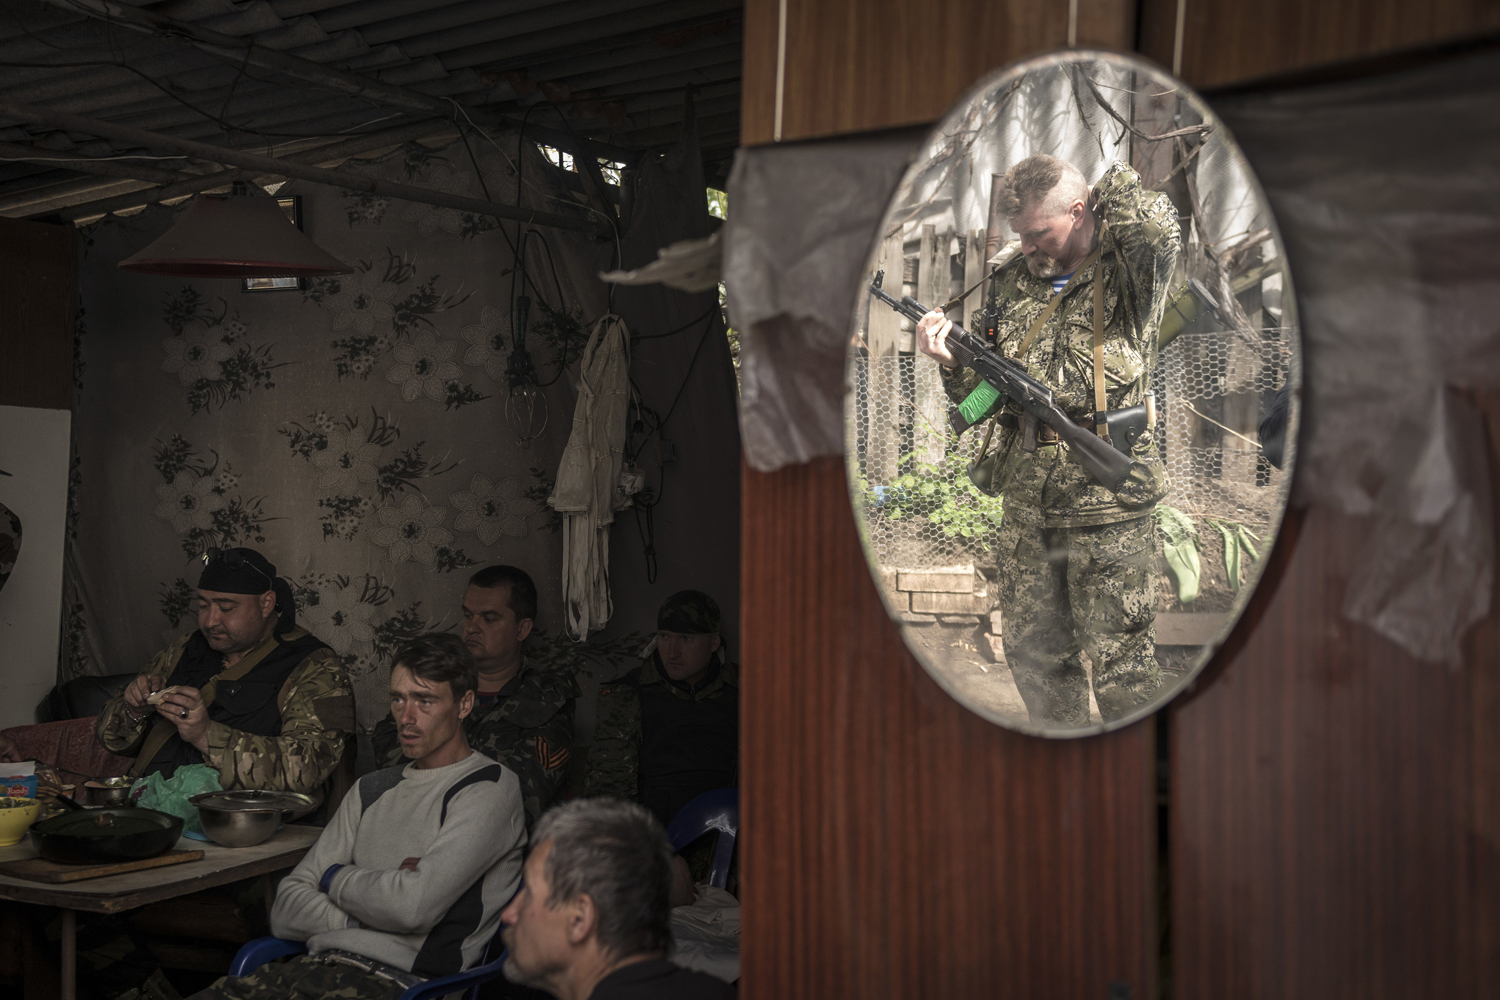 A pro-Russian militant is reflected in a mirror as he adjusts his rifle, while others watch a Victory Day military parade in Moscow on the television, as they start their day in Slovyansk, eastern Ukraine.